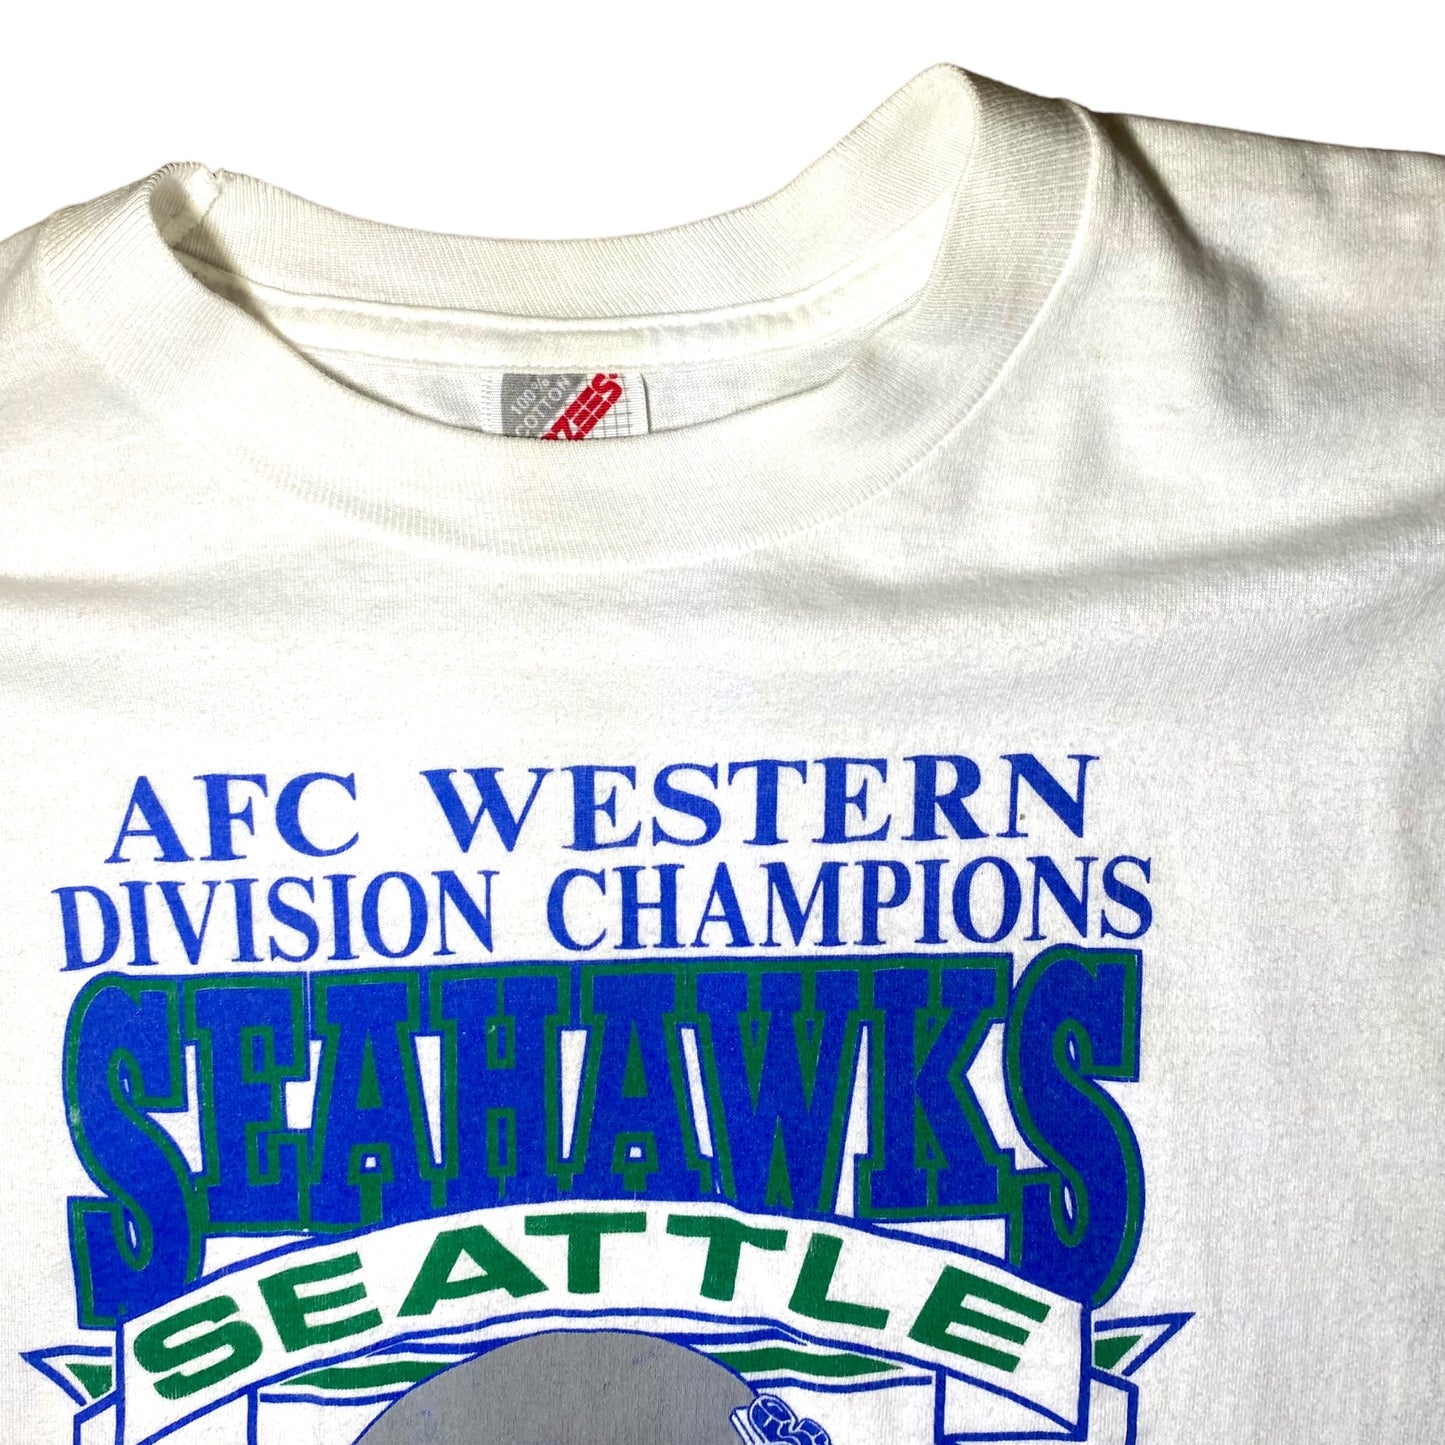 Jerzees x Logo 7 - Seattle Seahawks Vintage 1988 Division Champions T-Shirt